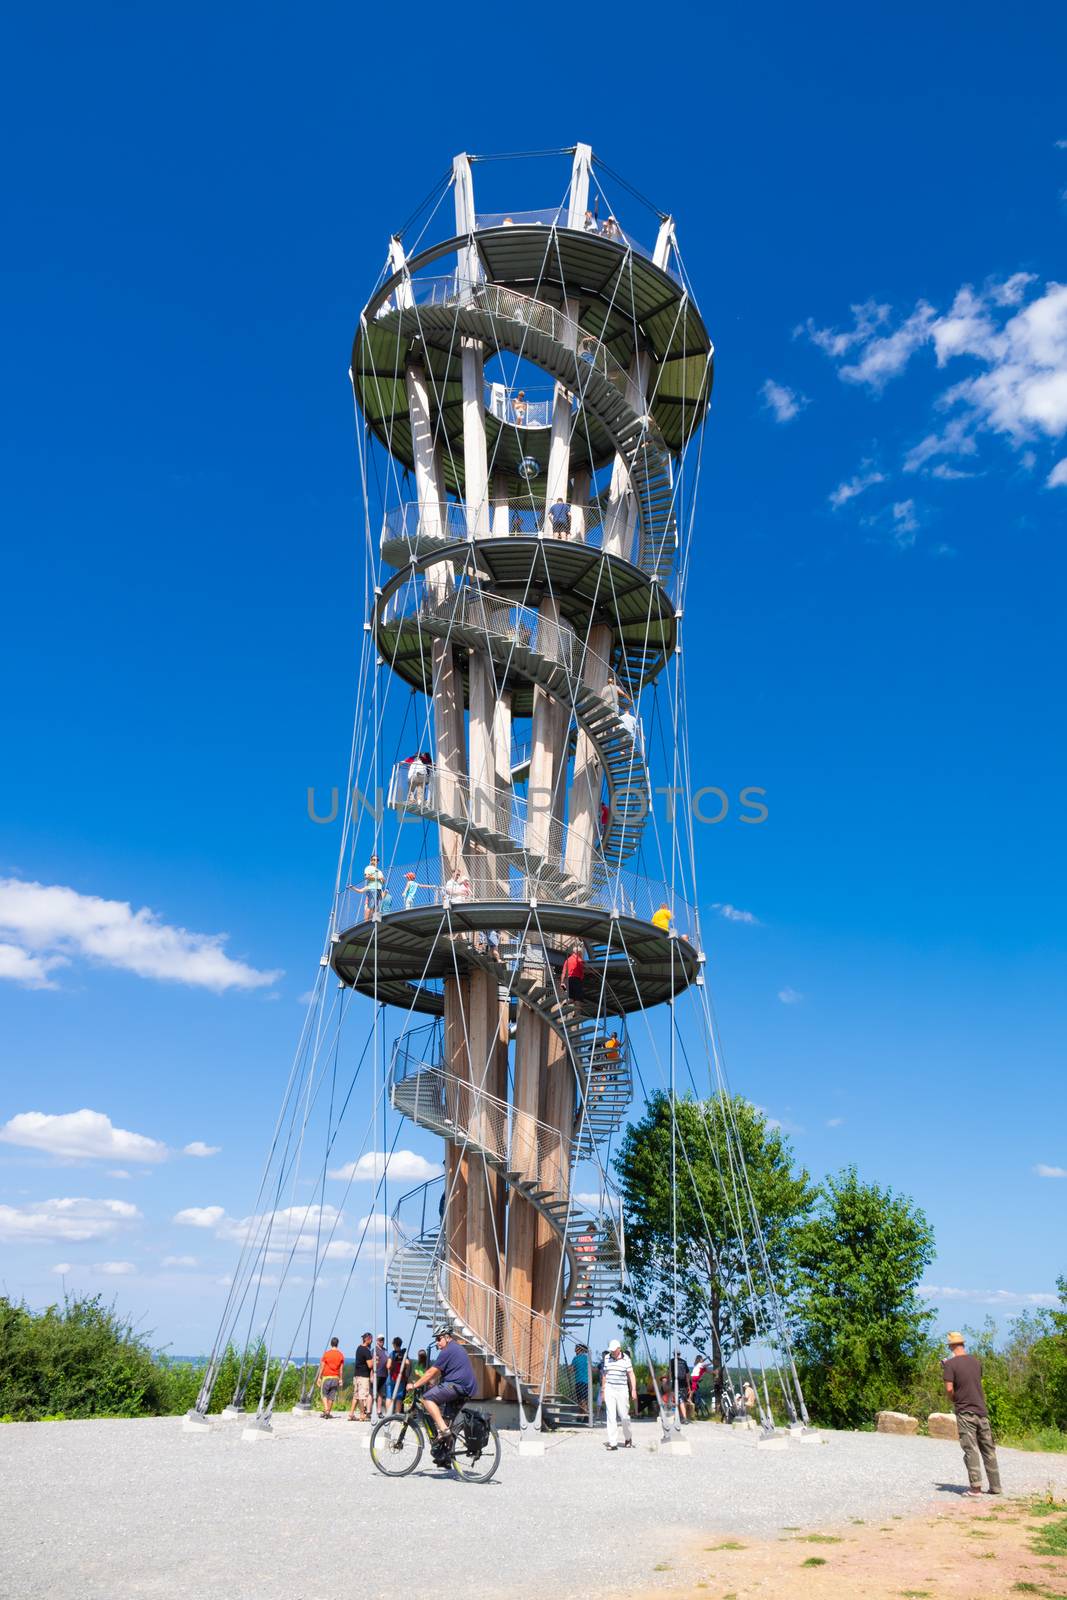 Schoenbuch, Baden Wuerttemberg, Germany - August 11, 2019: Observation tower in the Schoenbuch forest near Herrenberg with many visitors on a summer sunday.